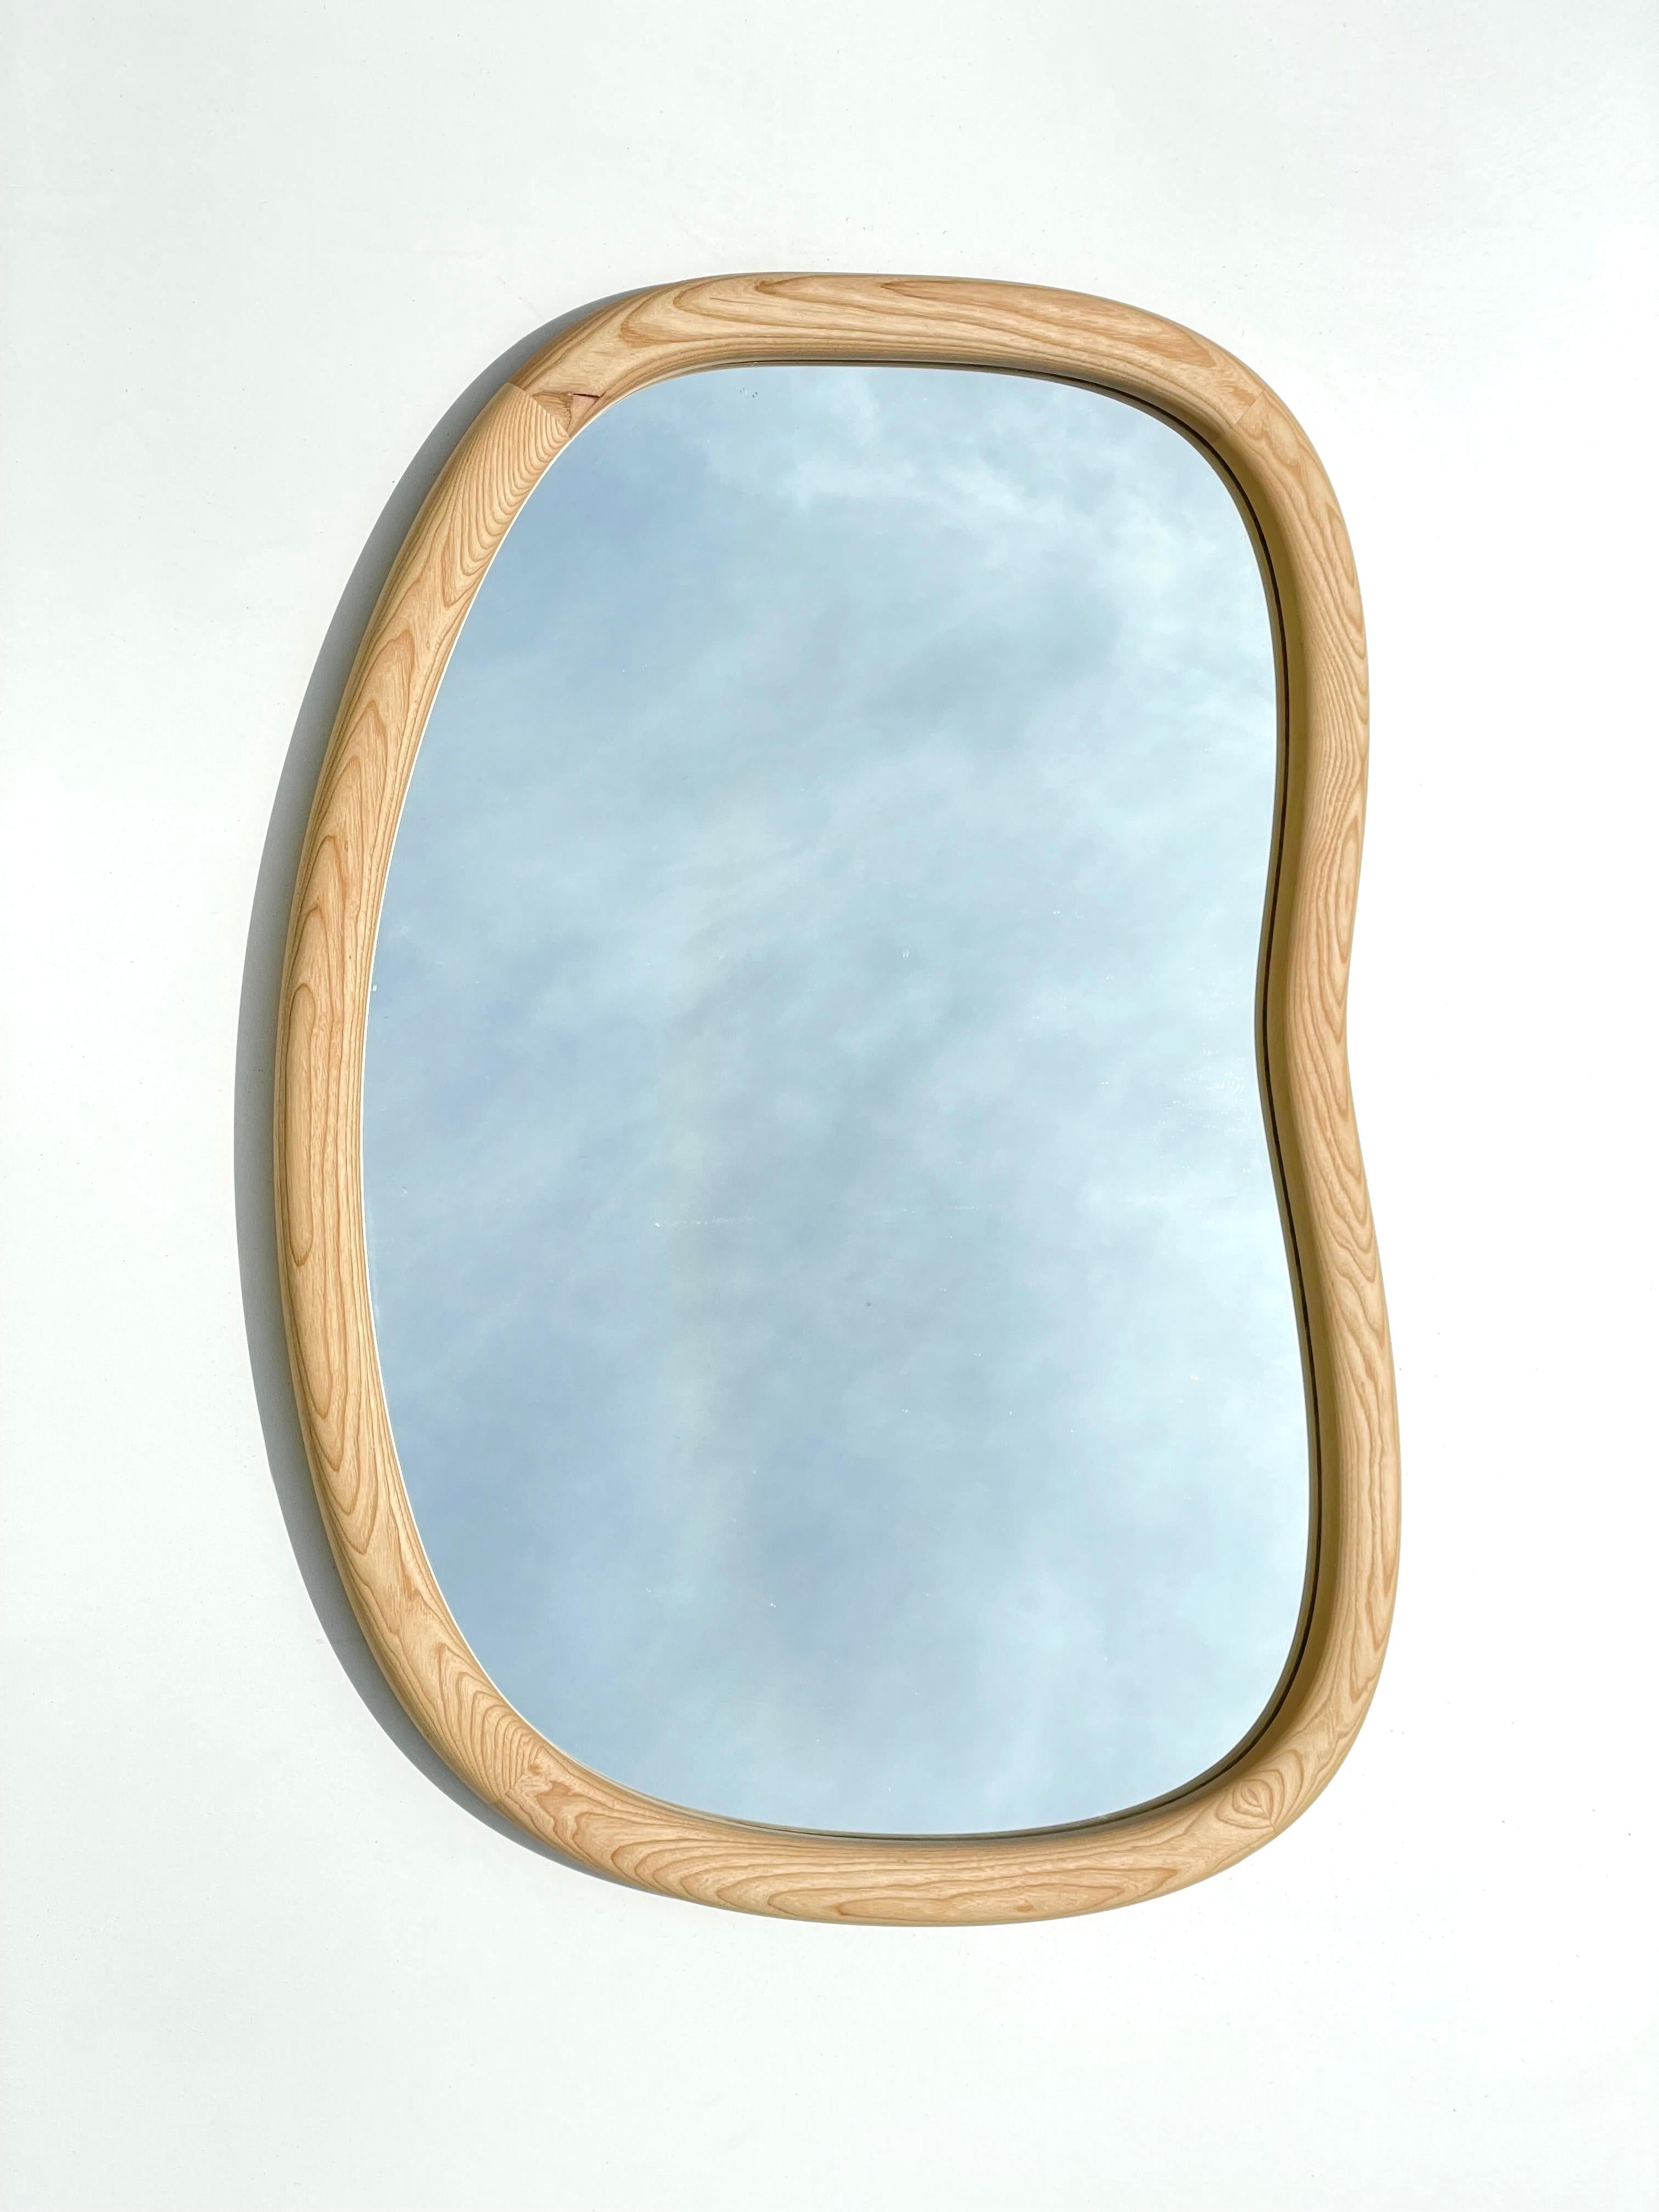 American Sarpa mirror - medium size wall mirror in natural ash by KLN Studio For Sale